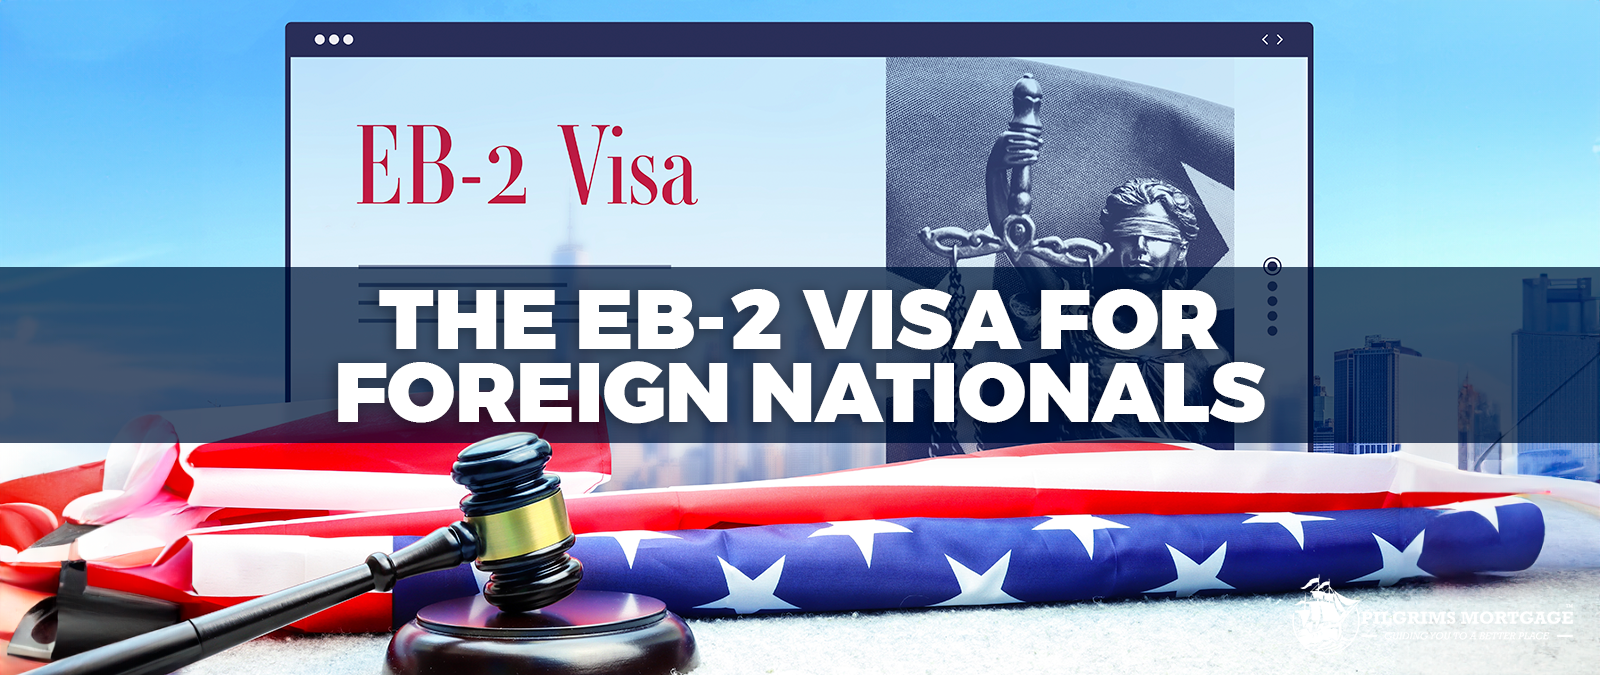 The EB-2 visa For Foreign Nationals